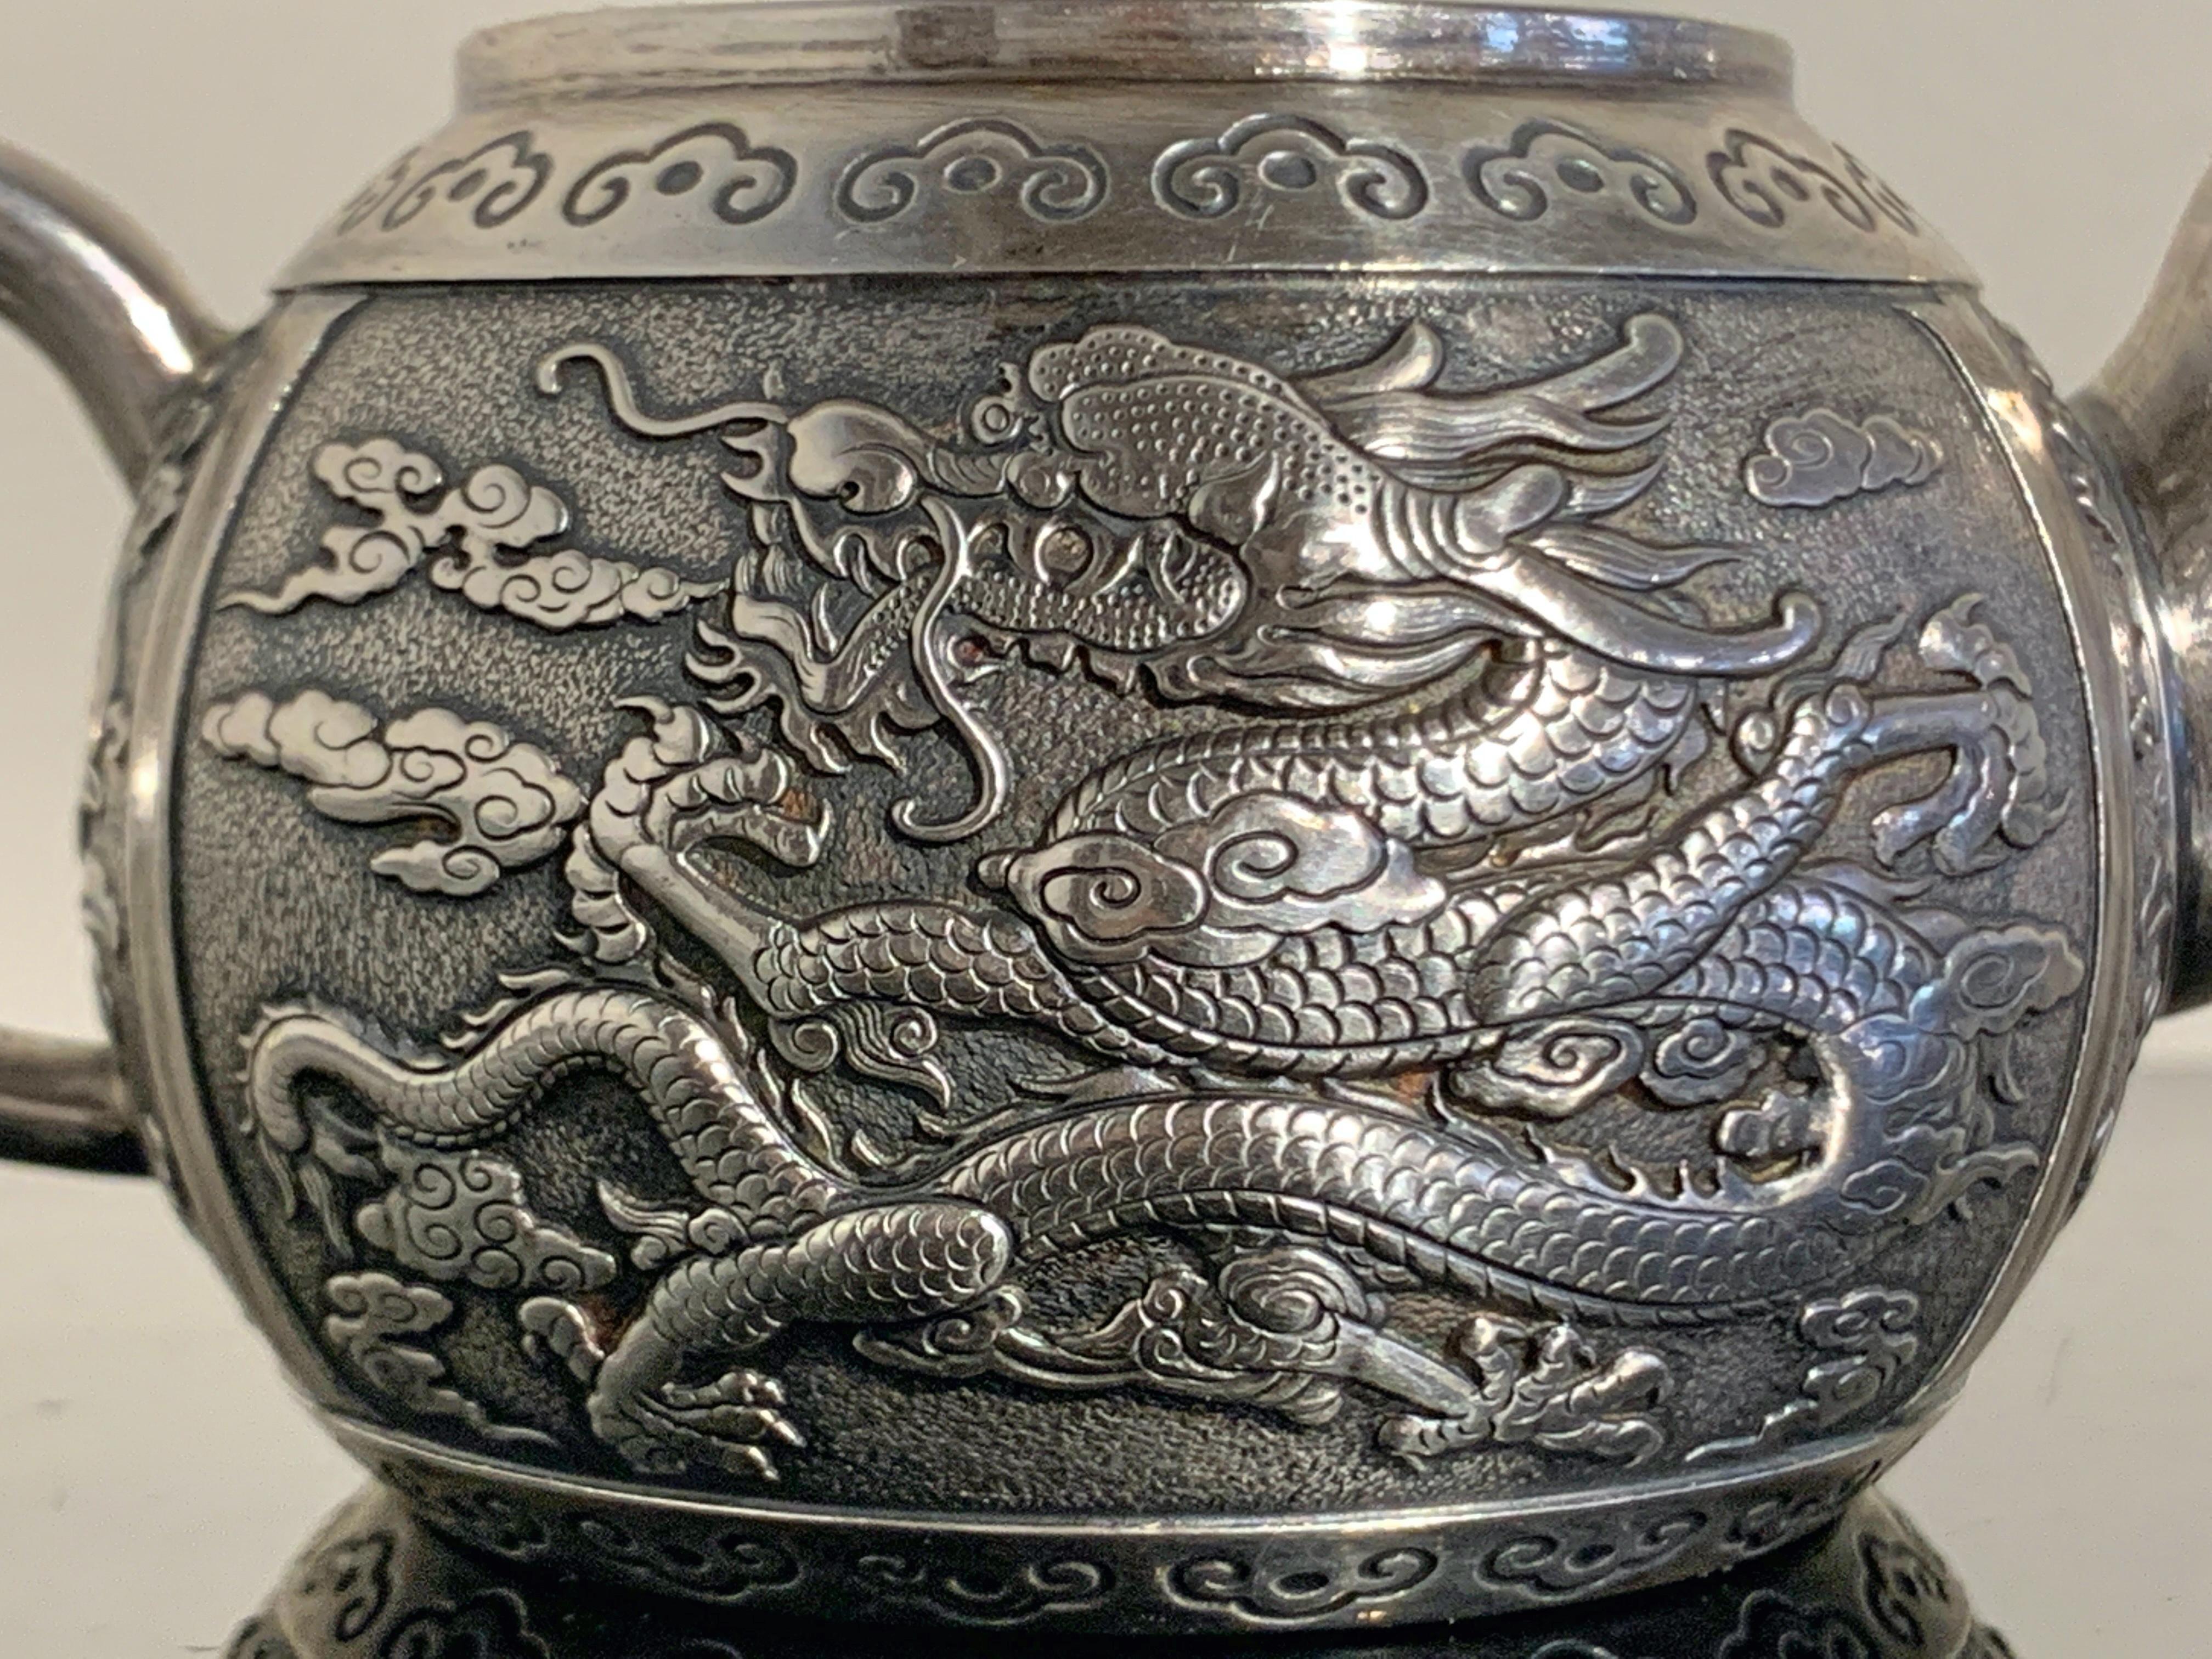 20th Century Small Chinese Export Silver Dragon Teapot by Wang Hing & Co, Late 19th Century